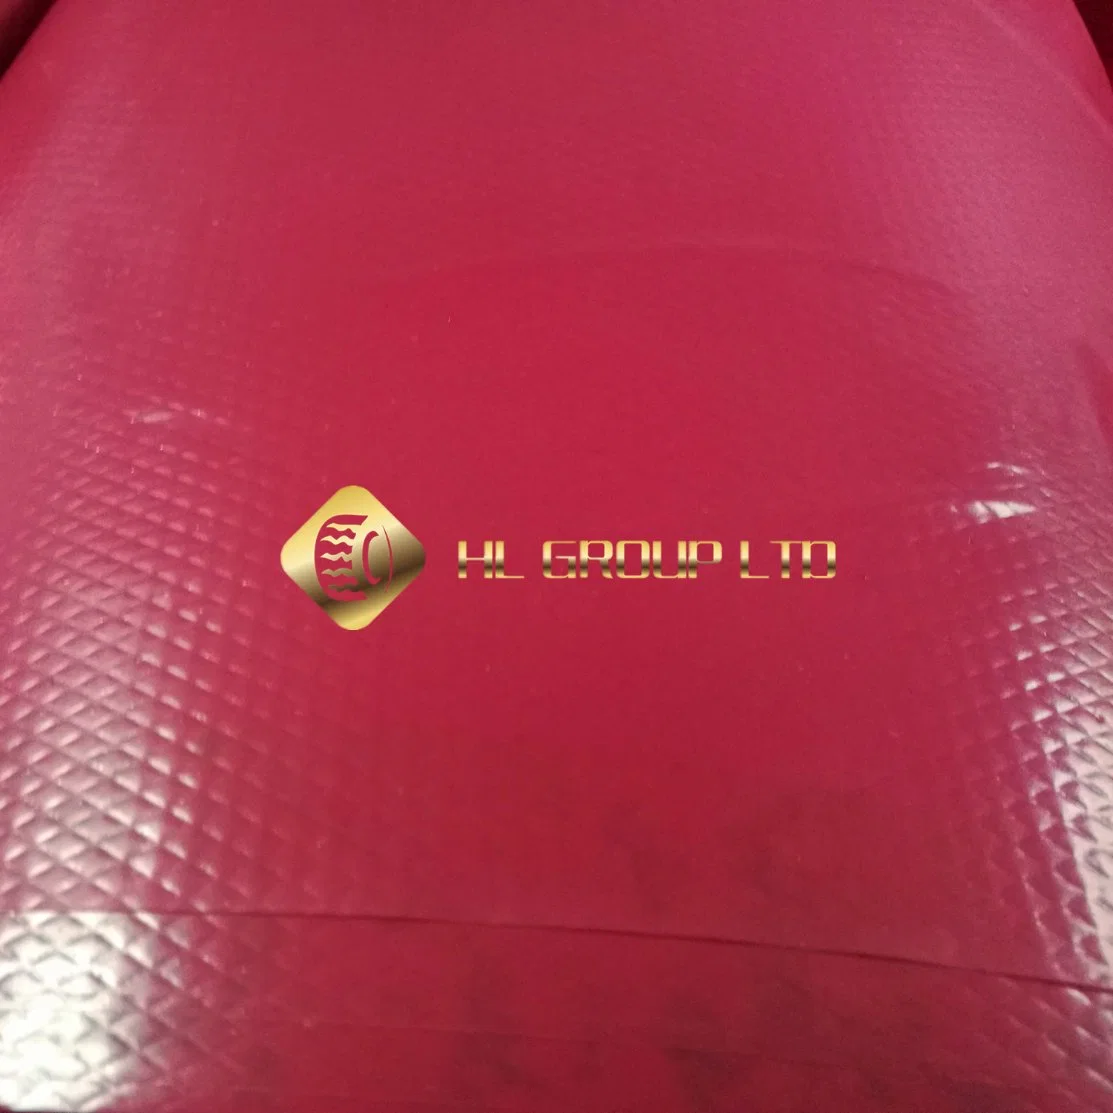 PE Rubber Insulating Film Used for Temporary Isolation Between Rubber Sheets in The Production Process of Rubber Enterprises